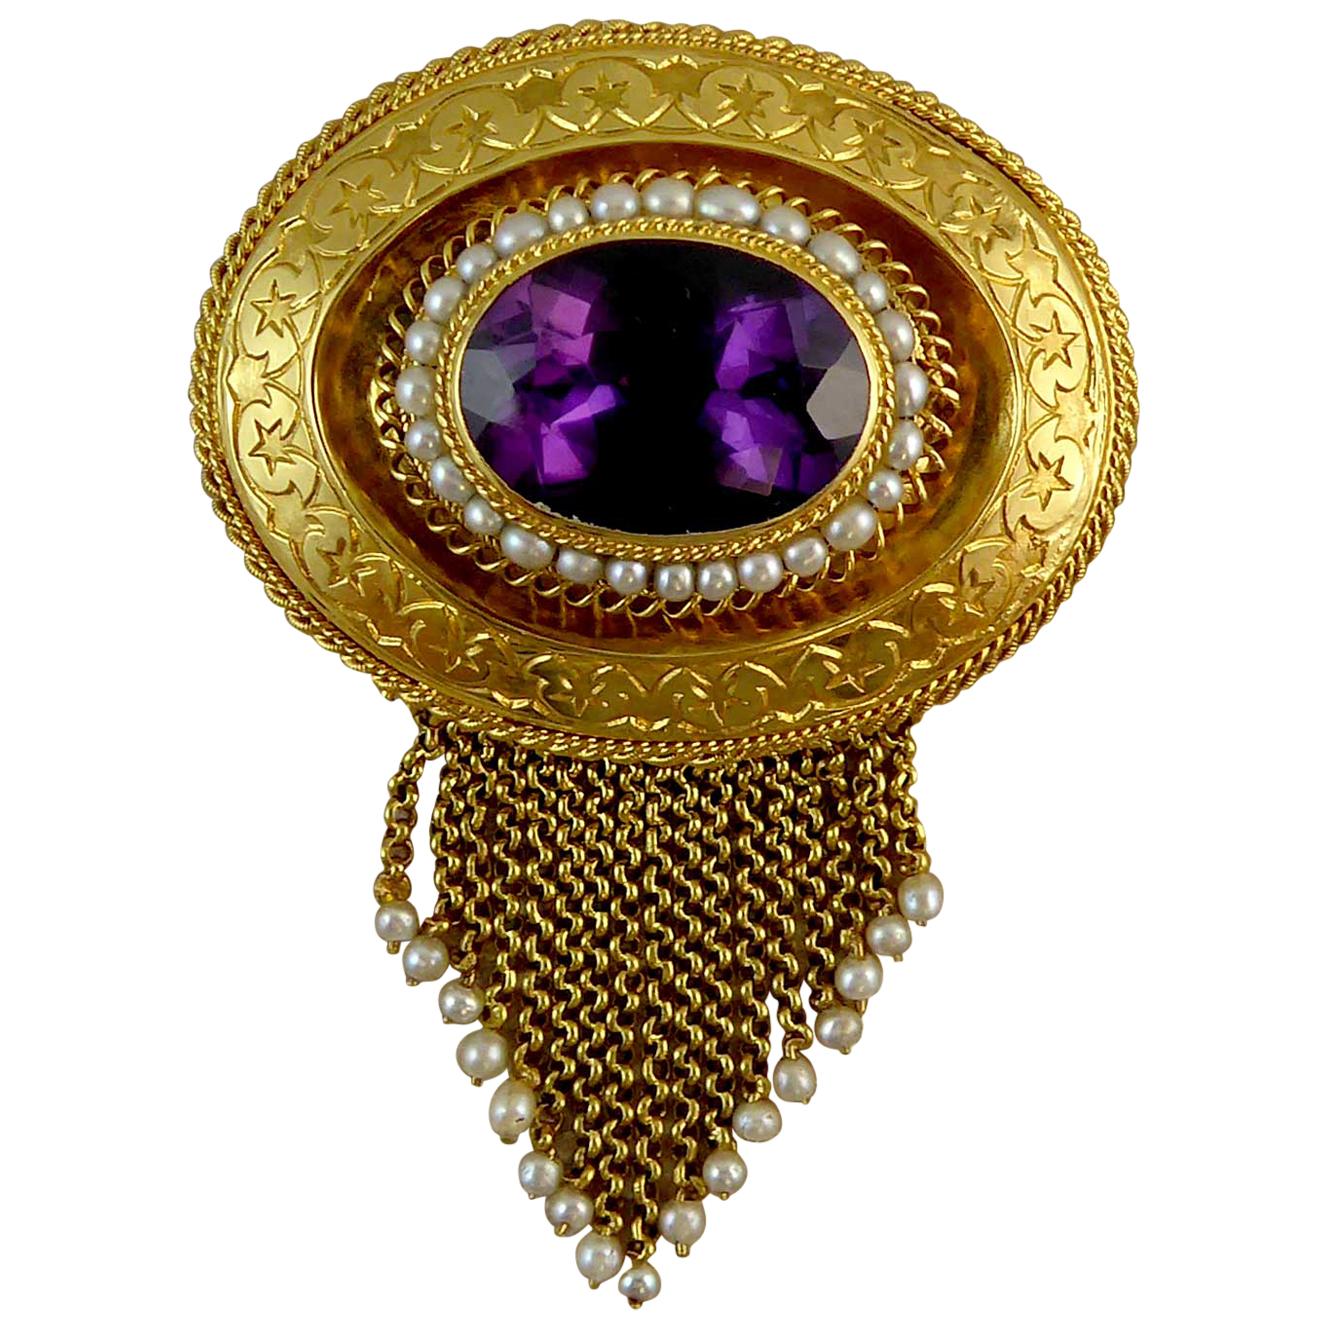 Antique Victorian Amethyst and Pearl Fringed Brooch, circa 1860s, 18 Carat Gold